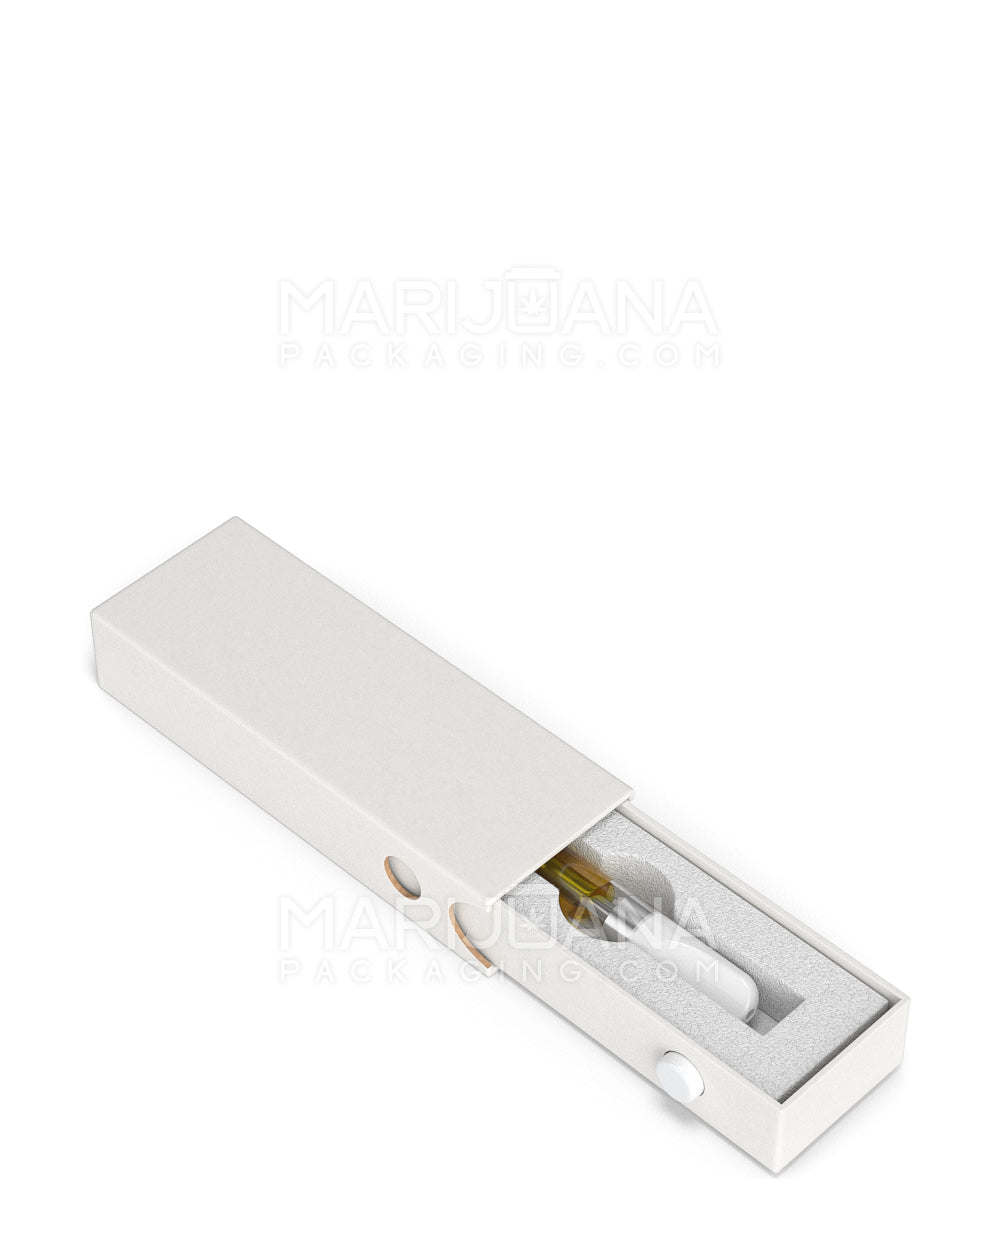 Child Resistant & Sustainable | 100% Recyclable Slim Cardboard Vape Cartridge Box w/ Press Button & Foam Insert | 100mm - White - 100 Count - 2